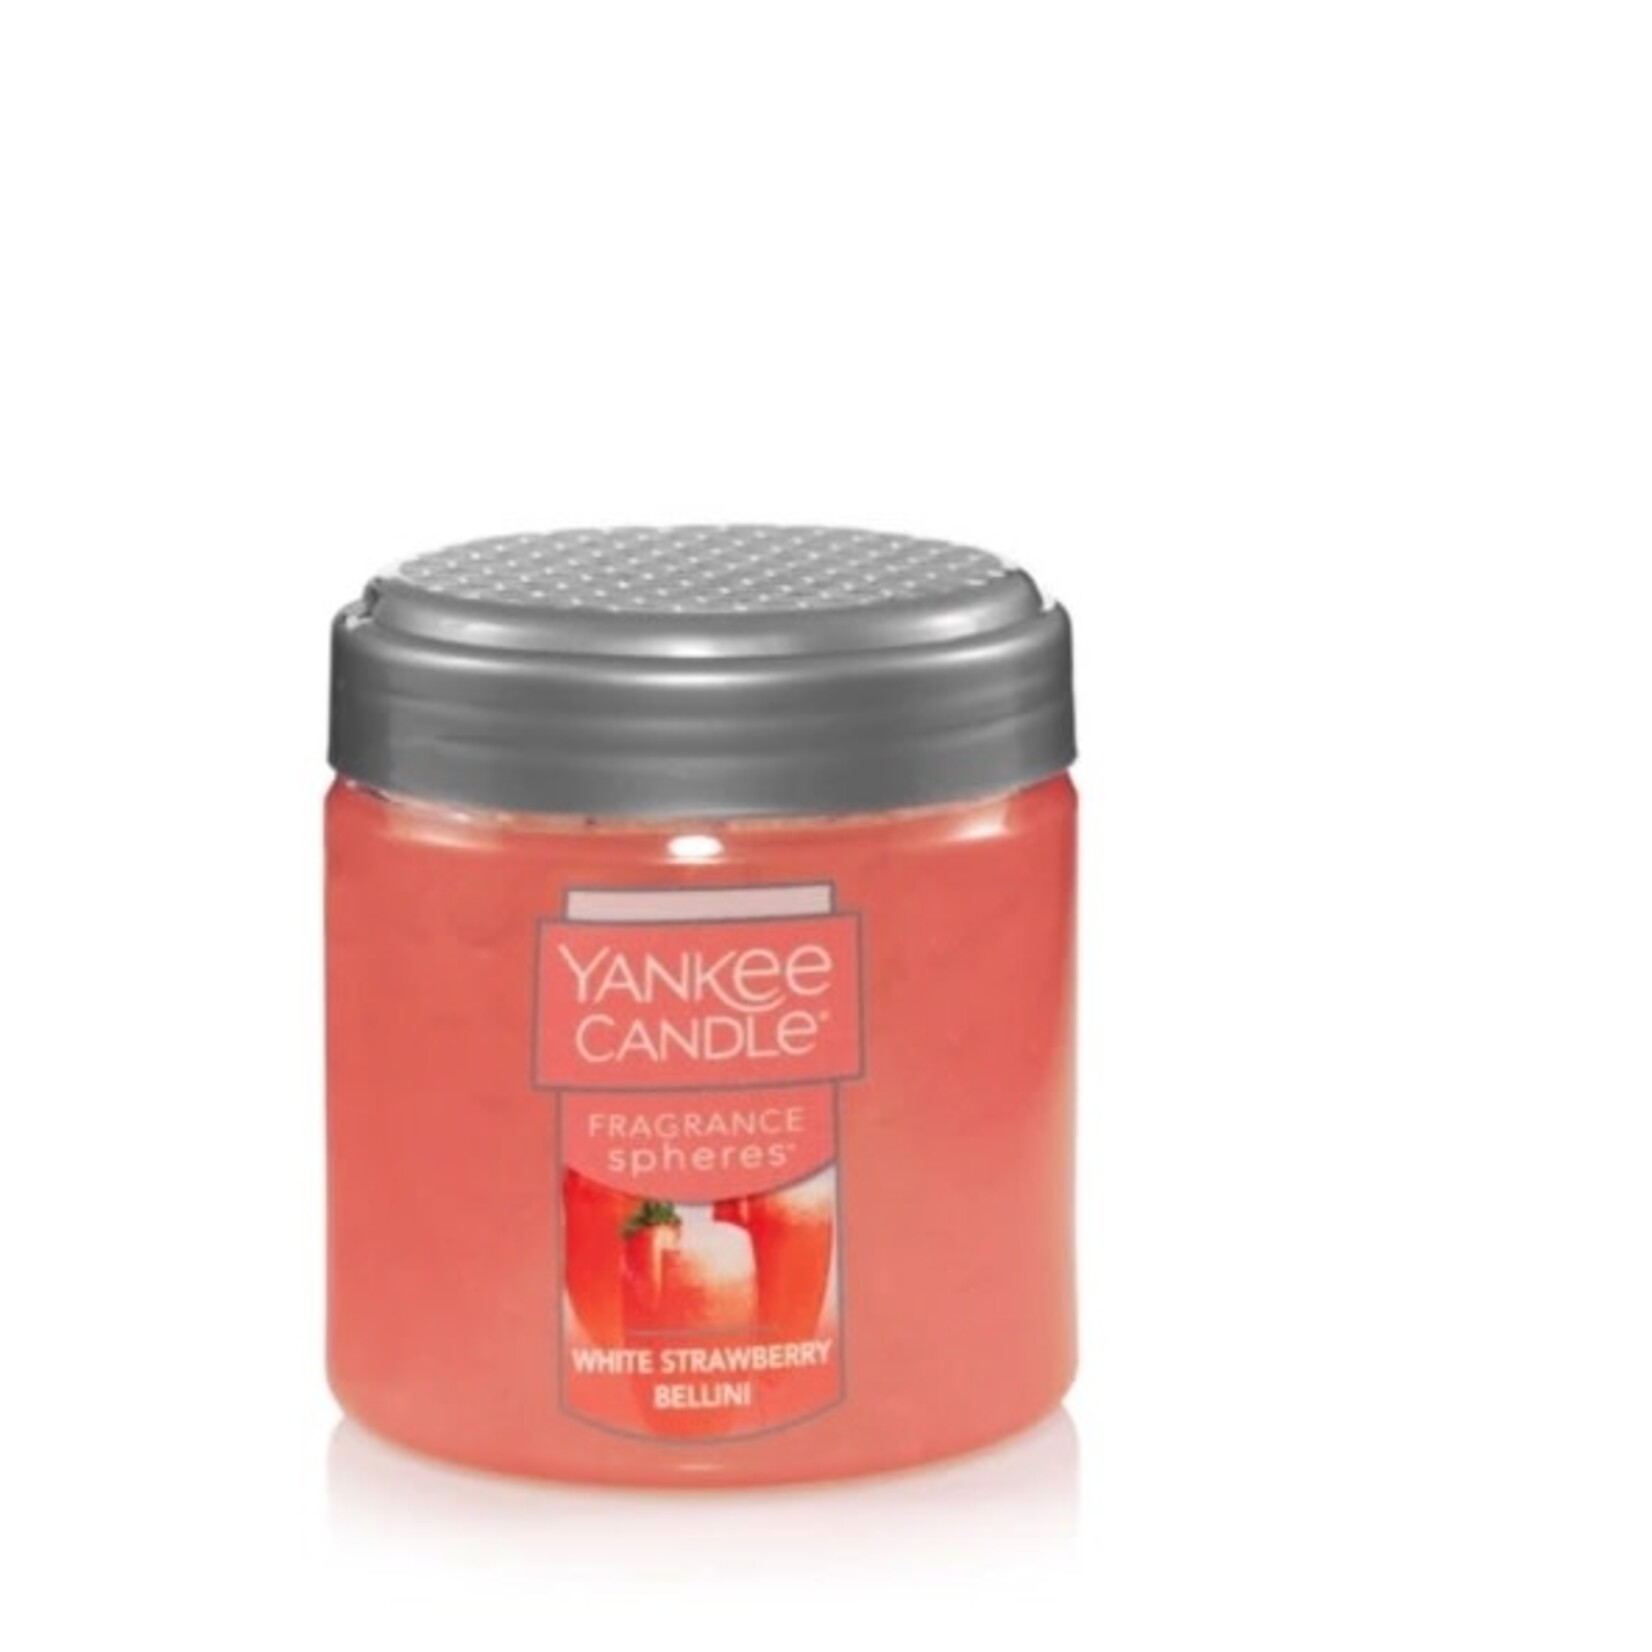 Yankee Candles Yankee Candle Fragrance Spheres Odor Neutralizing White Strawberry Bellini Scent Beads 6 oz